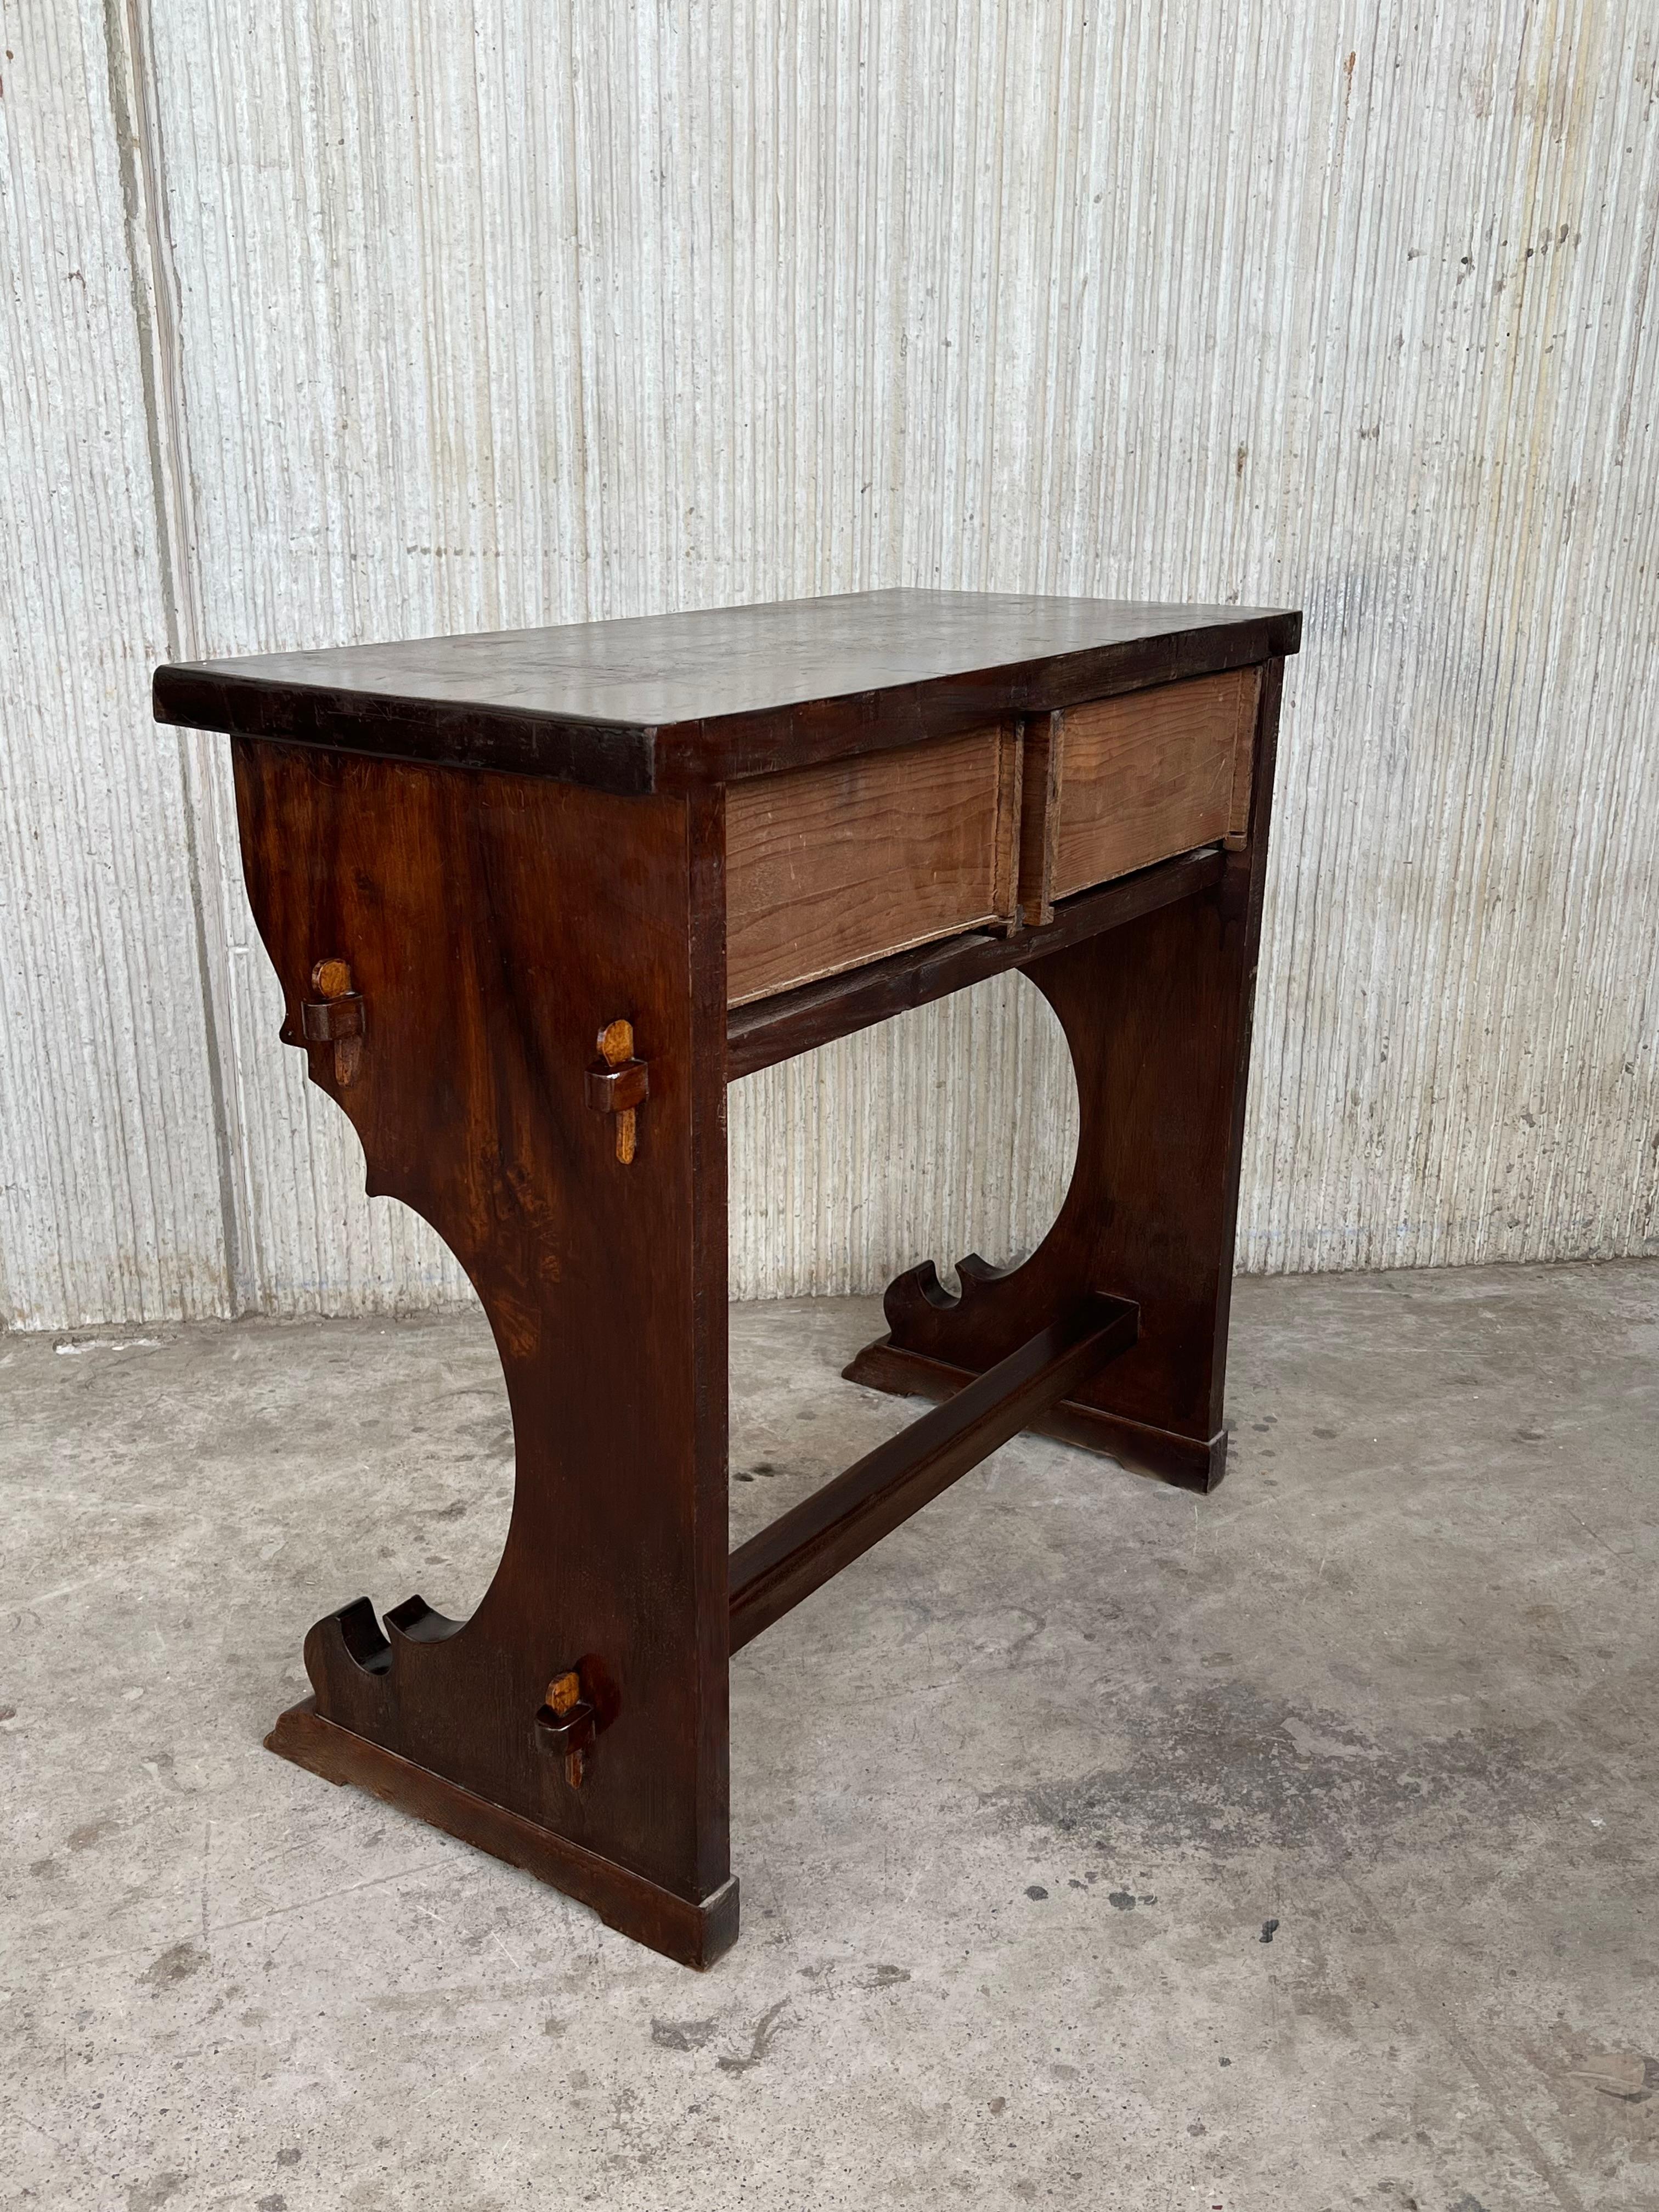 20th Century Spanish Colonial Narrow Console Table with Two Drawers with Iron Hardware For Sale